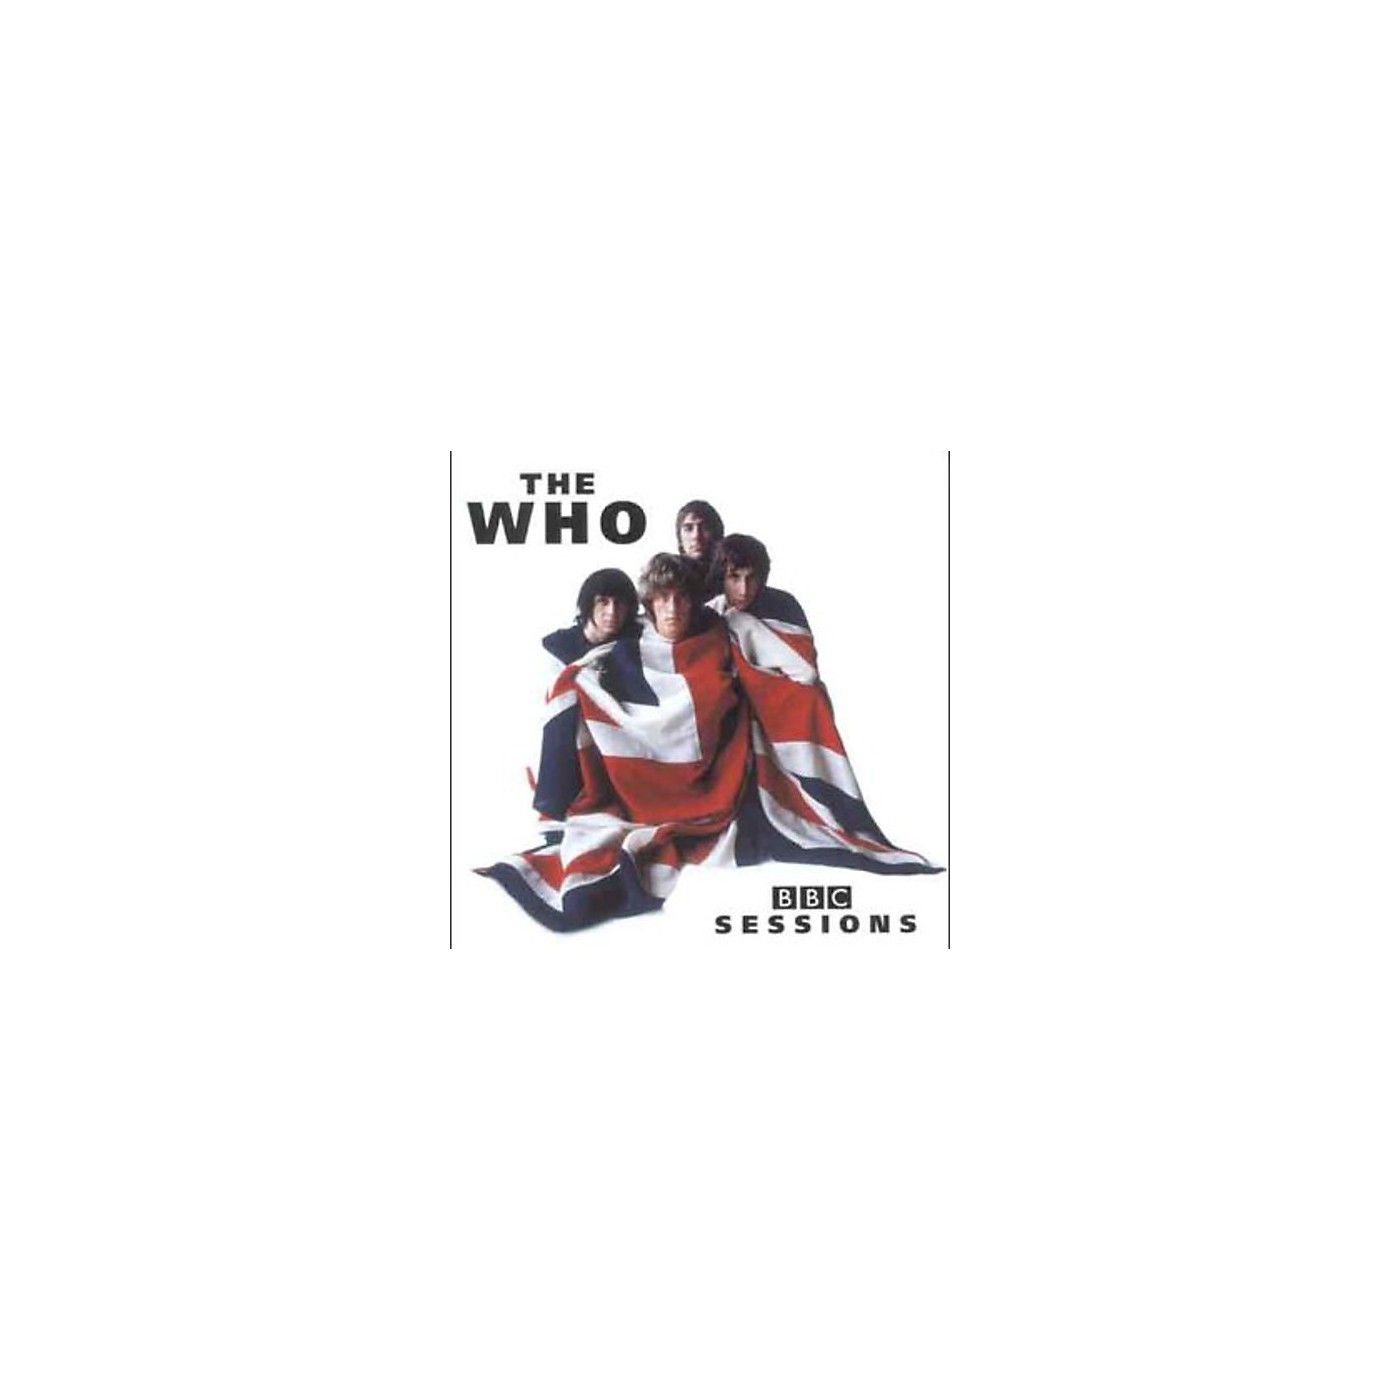 Alliance The Who - BBC Sessions thumbnail